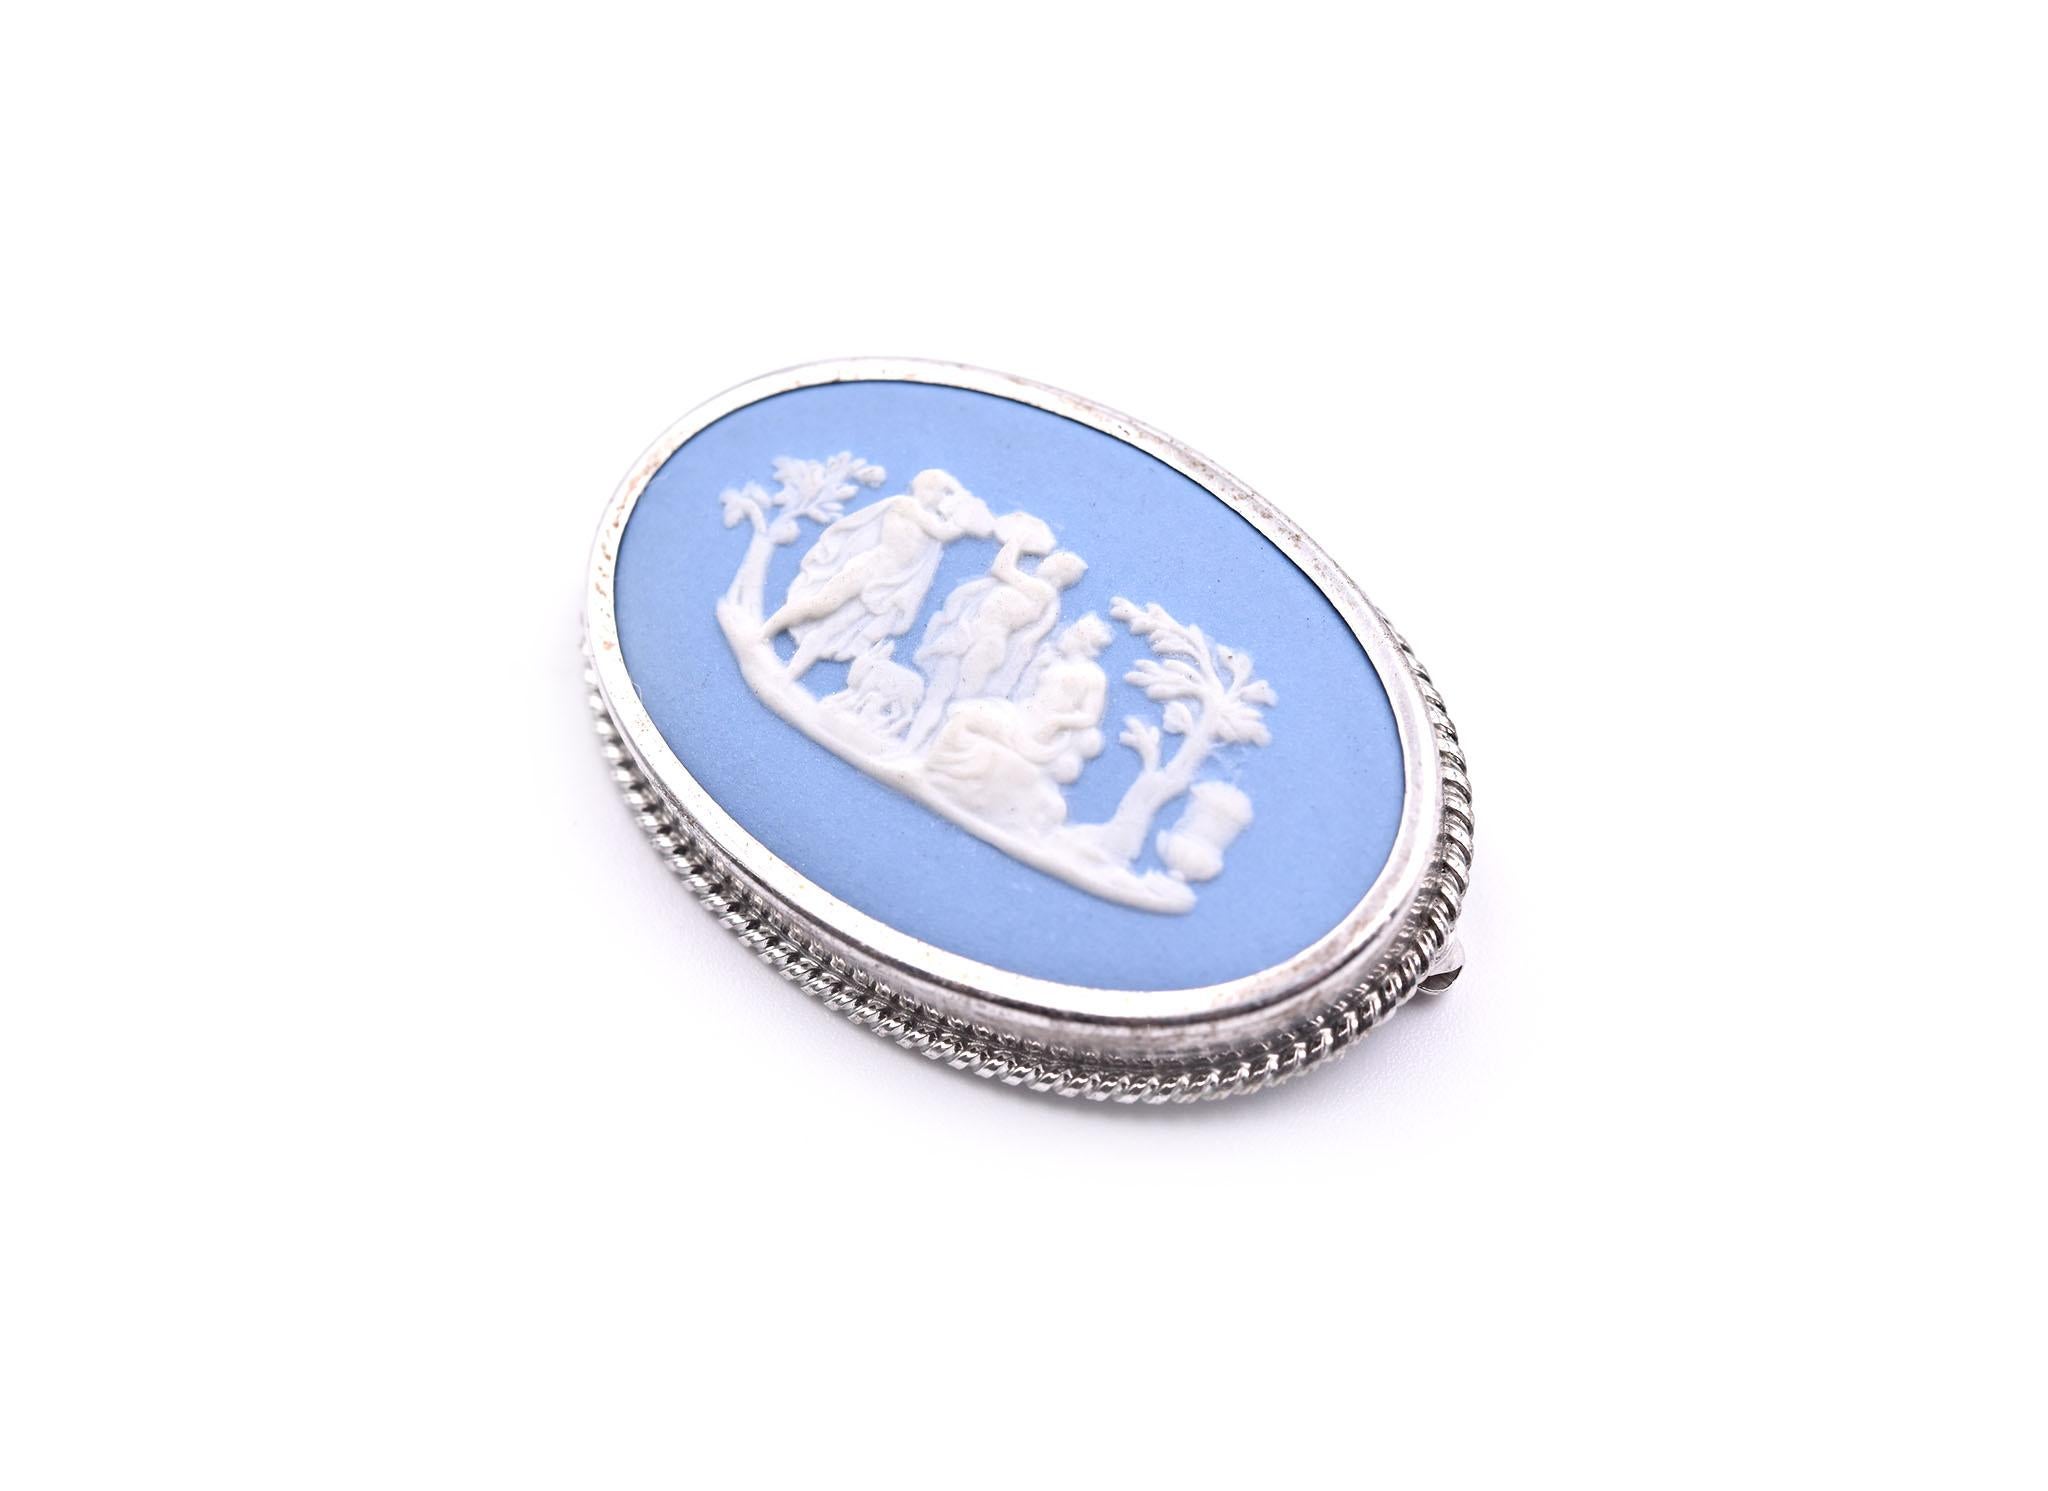 Designer: custom design “made in England”
Material: sterling silver
Dimensions: pin measures 28.90mm by 41.44mm
Weight: 9.60 grams
